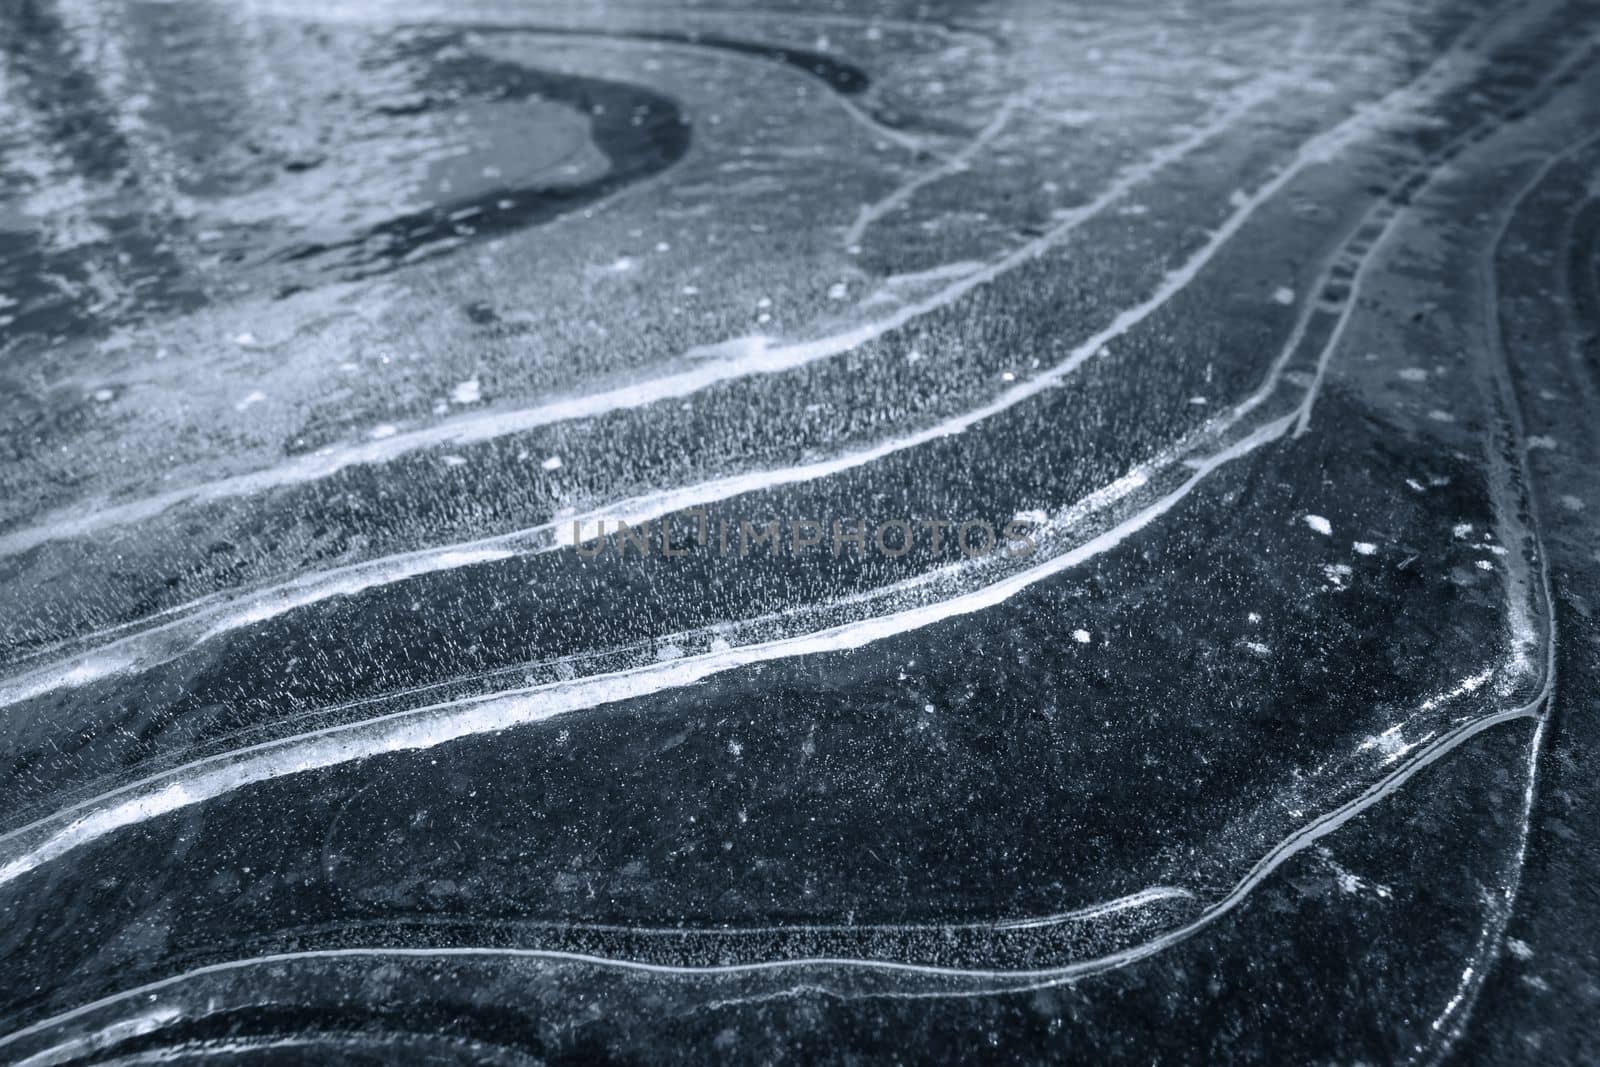 Abstract winter photo with beauty of a dark, icy landscape, with snowflakes forming delicate curves against a contrasting white backdrop. The minimalist composition and monochromatic palette create a moody, mysterious atmosphere, making it perfect for backgrounds, graphic designs, and illustrations by LipikStockMedia